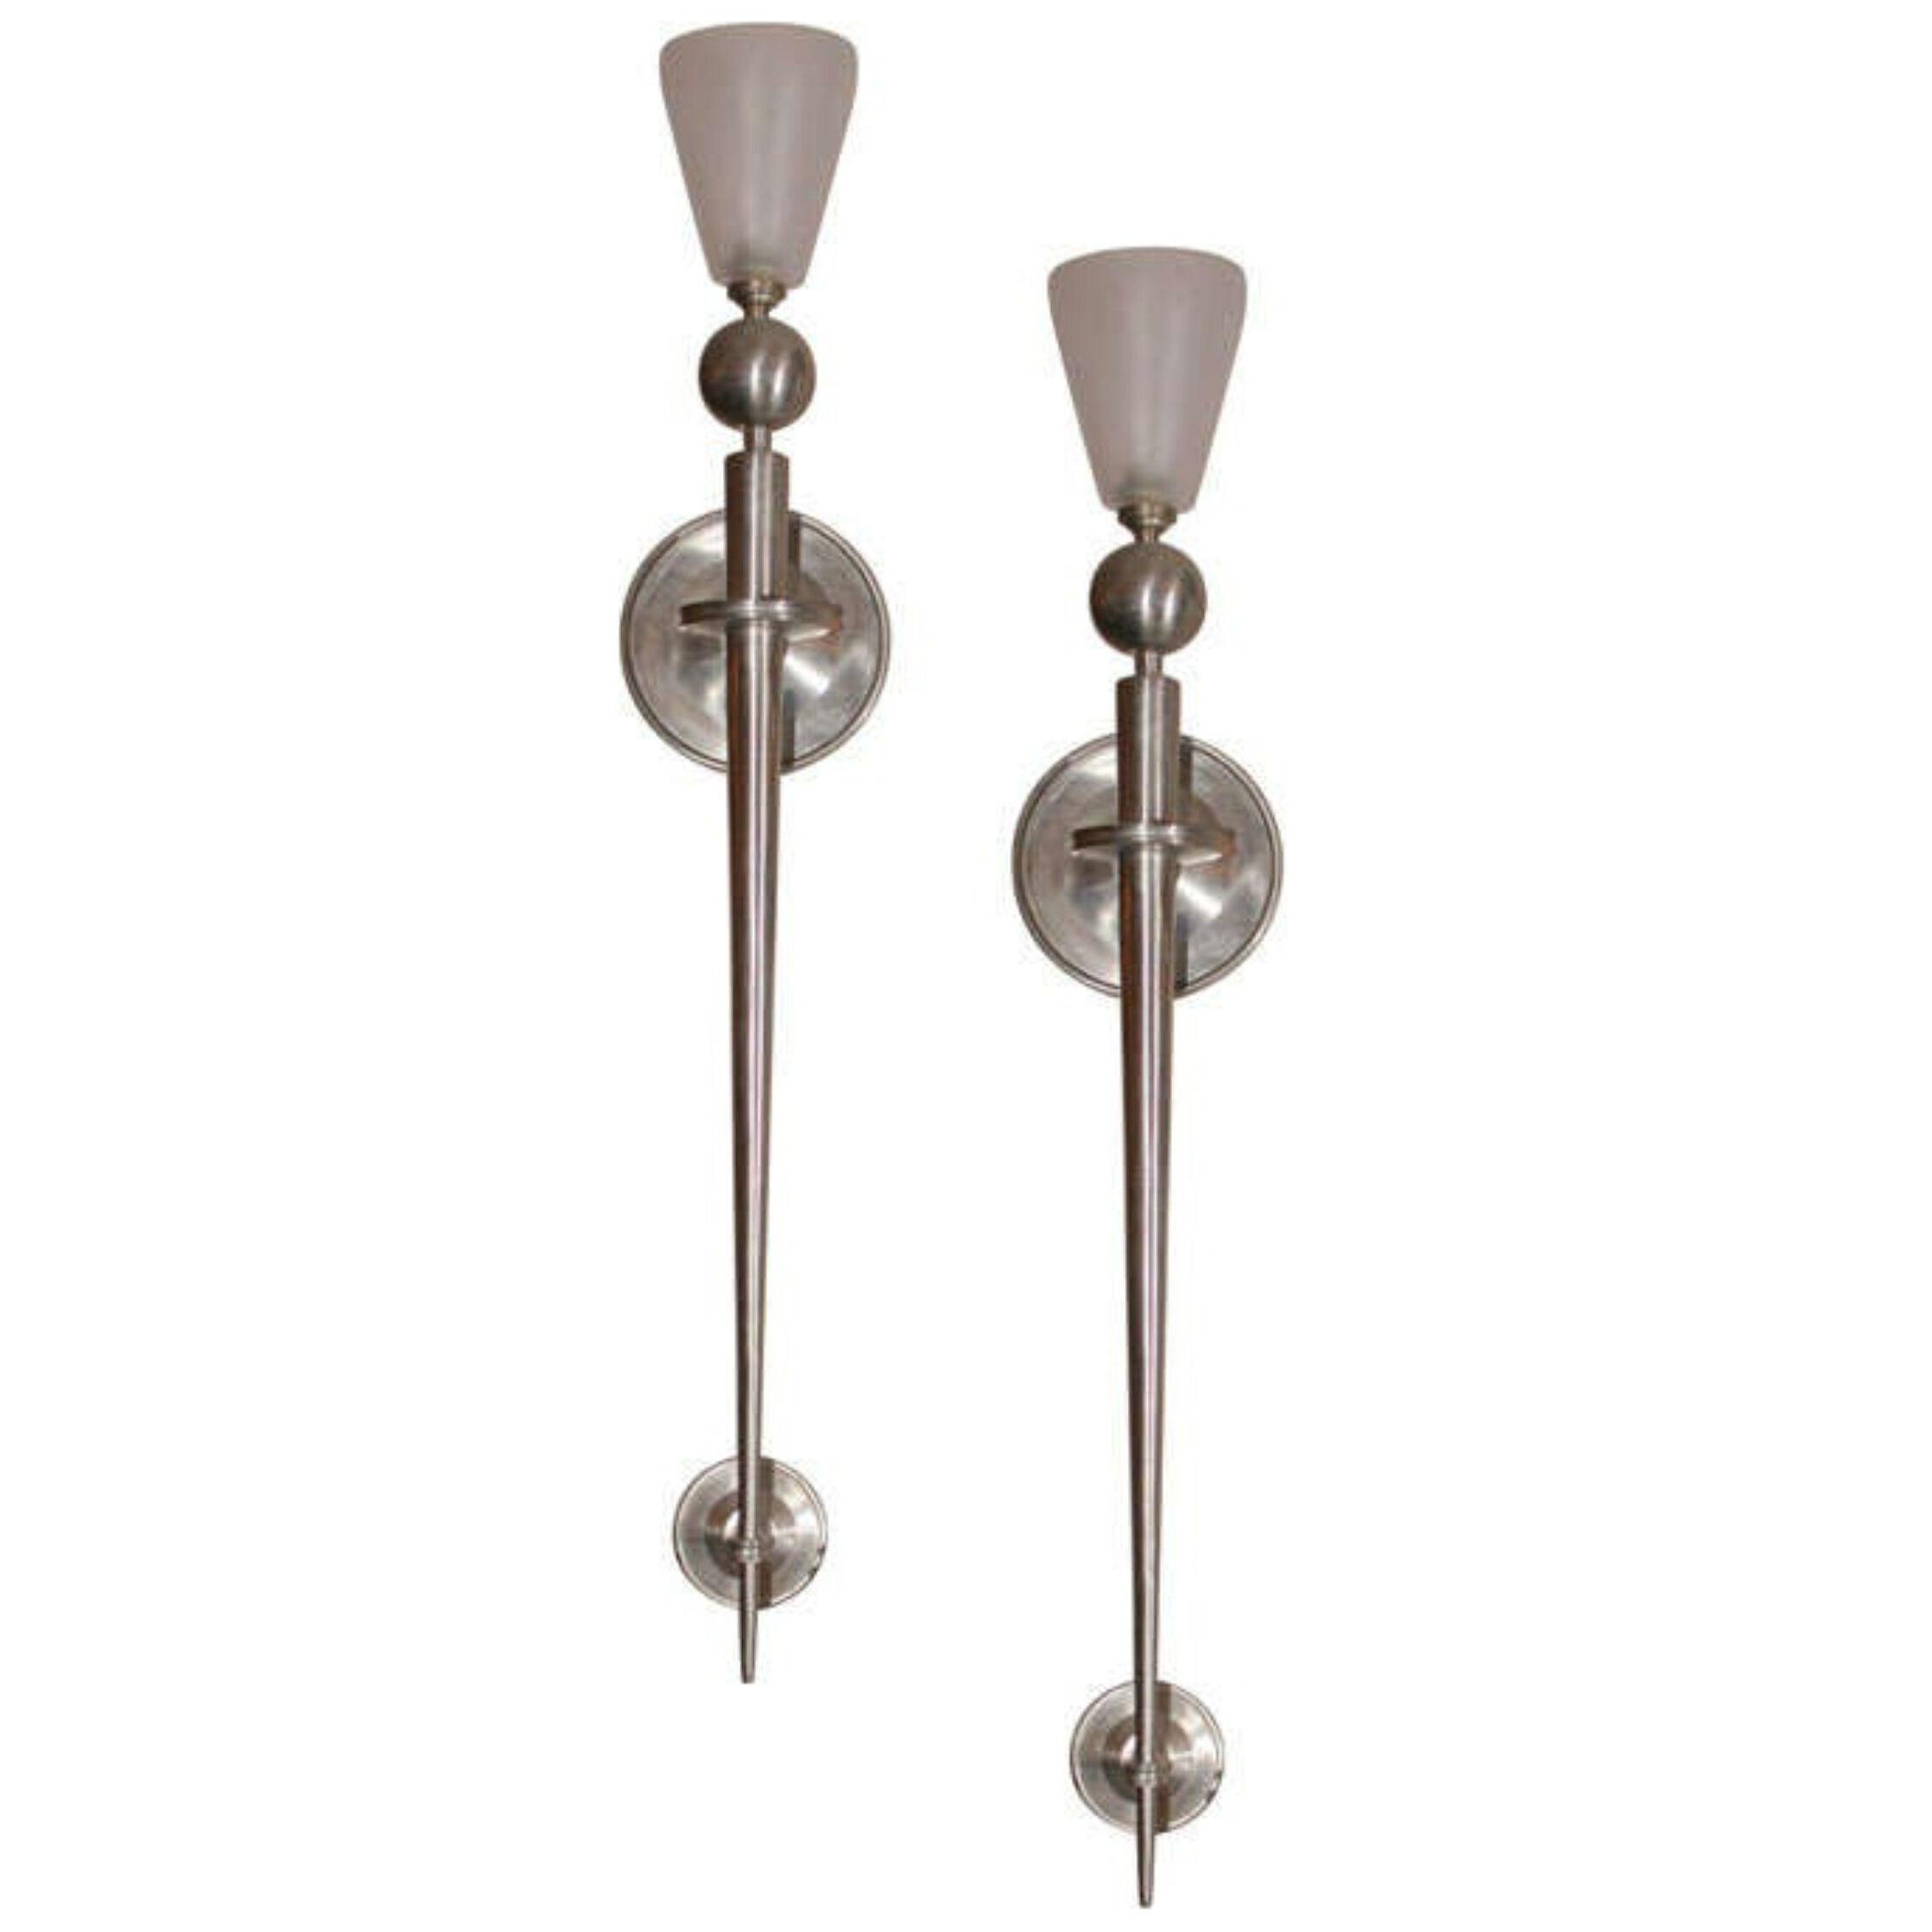 Pair of Wall-Sconces by Maison Jansen